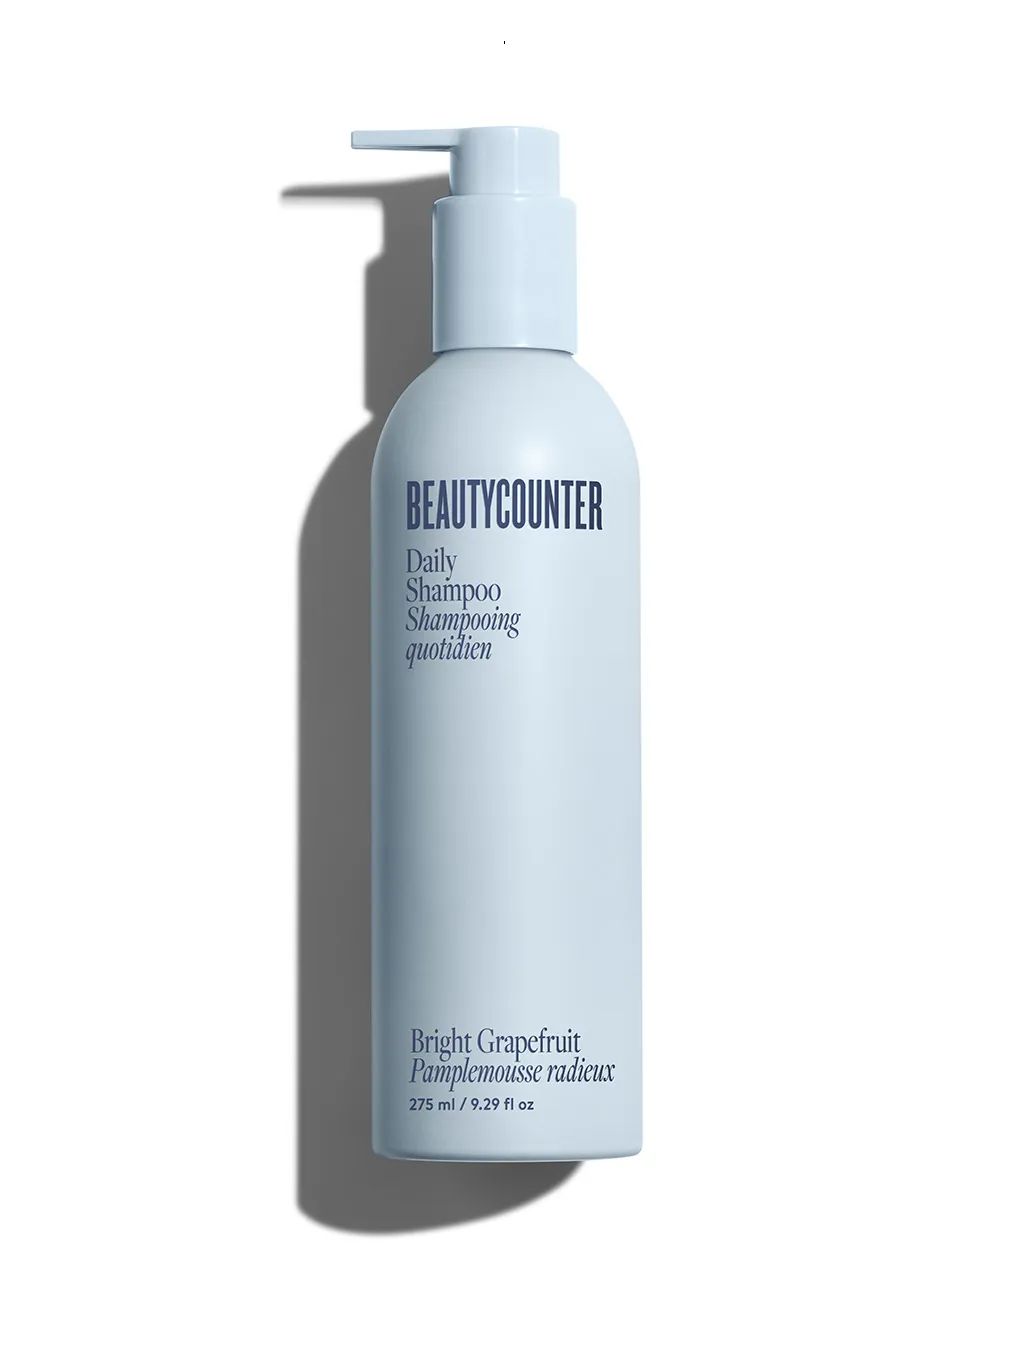 Daily Shampoo in Bright Grapefruit - Beautycounter - Skin Care, Makeup, Bath and Body and more! | Beautycounter.com